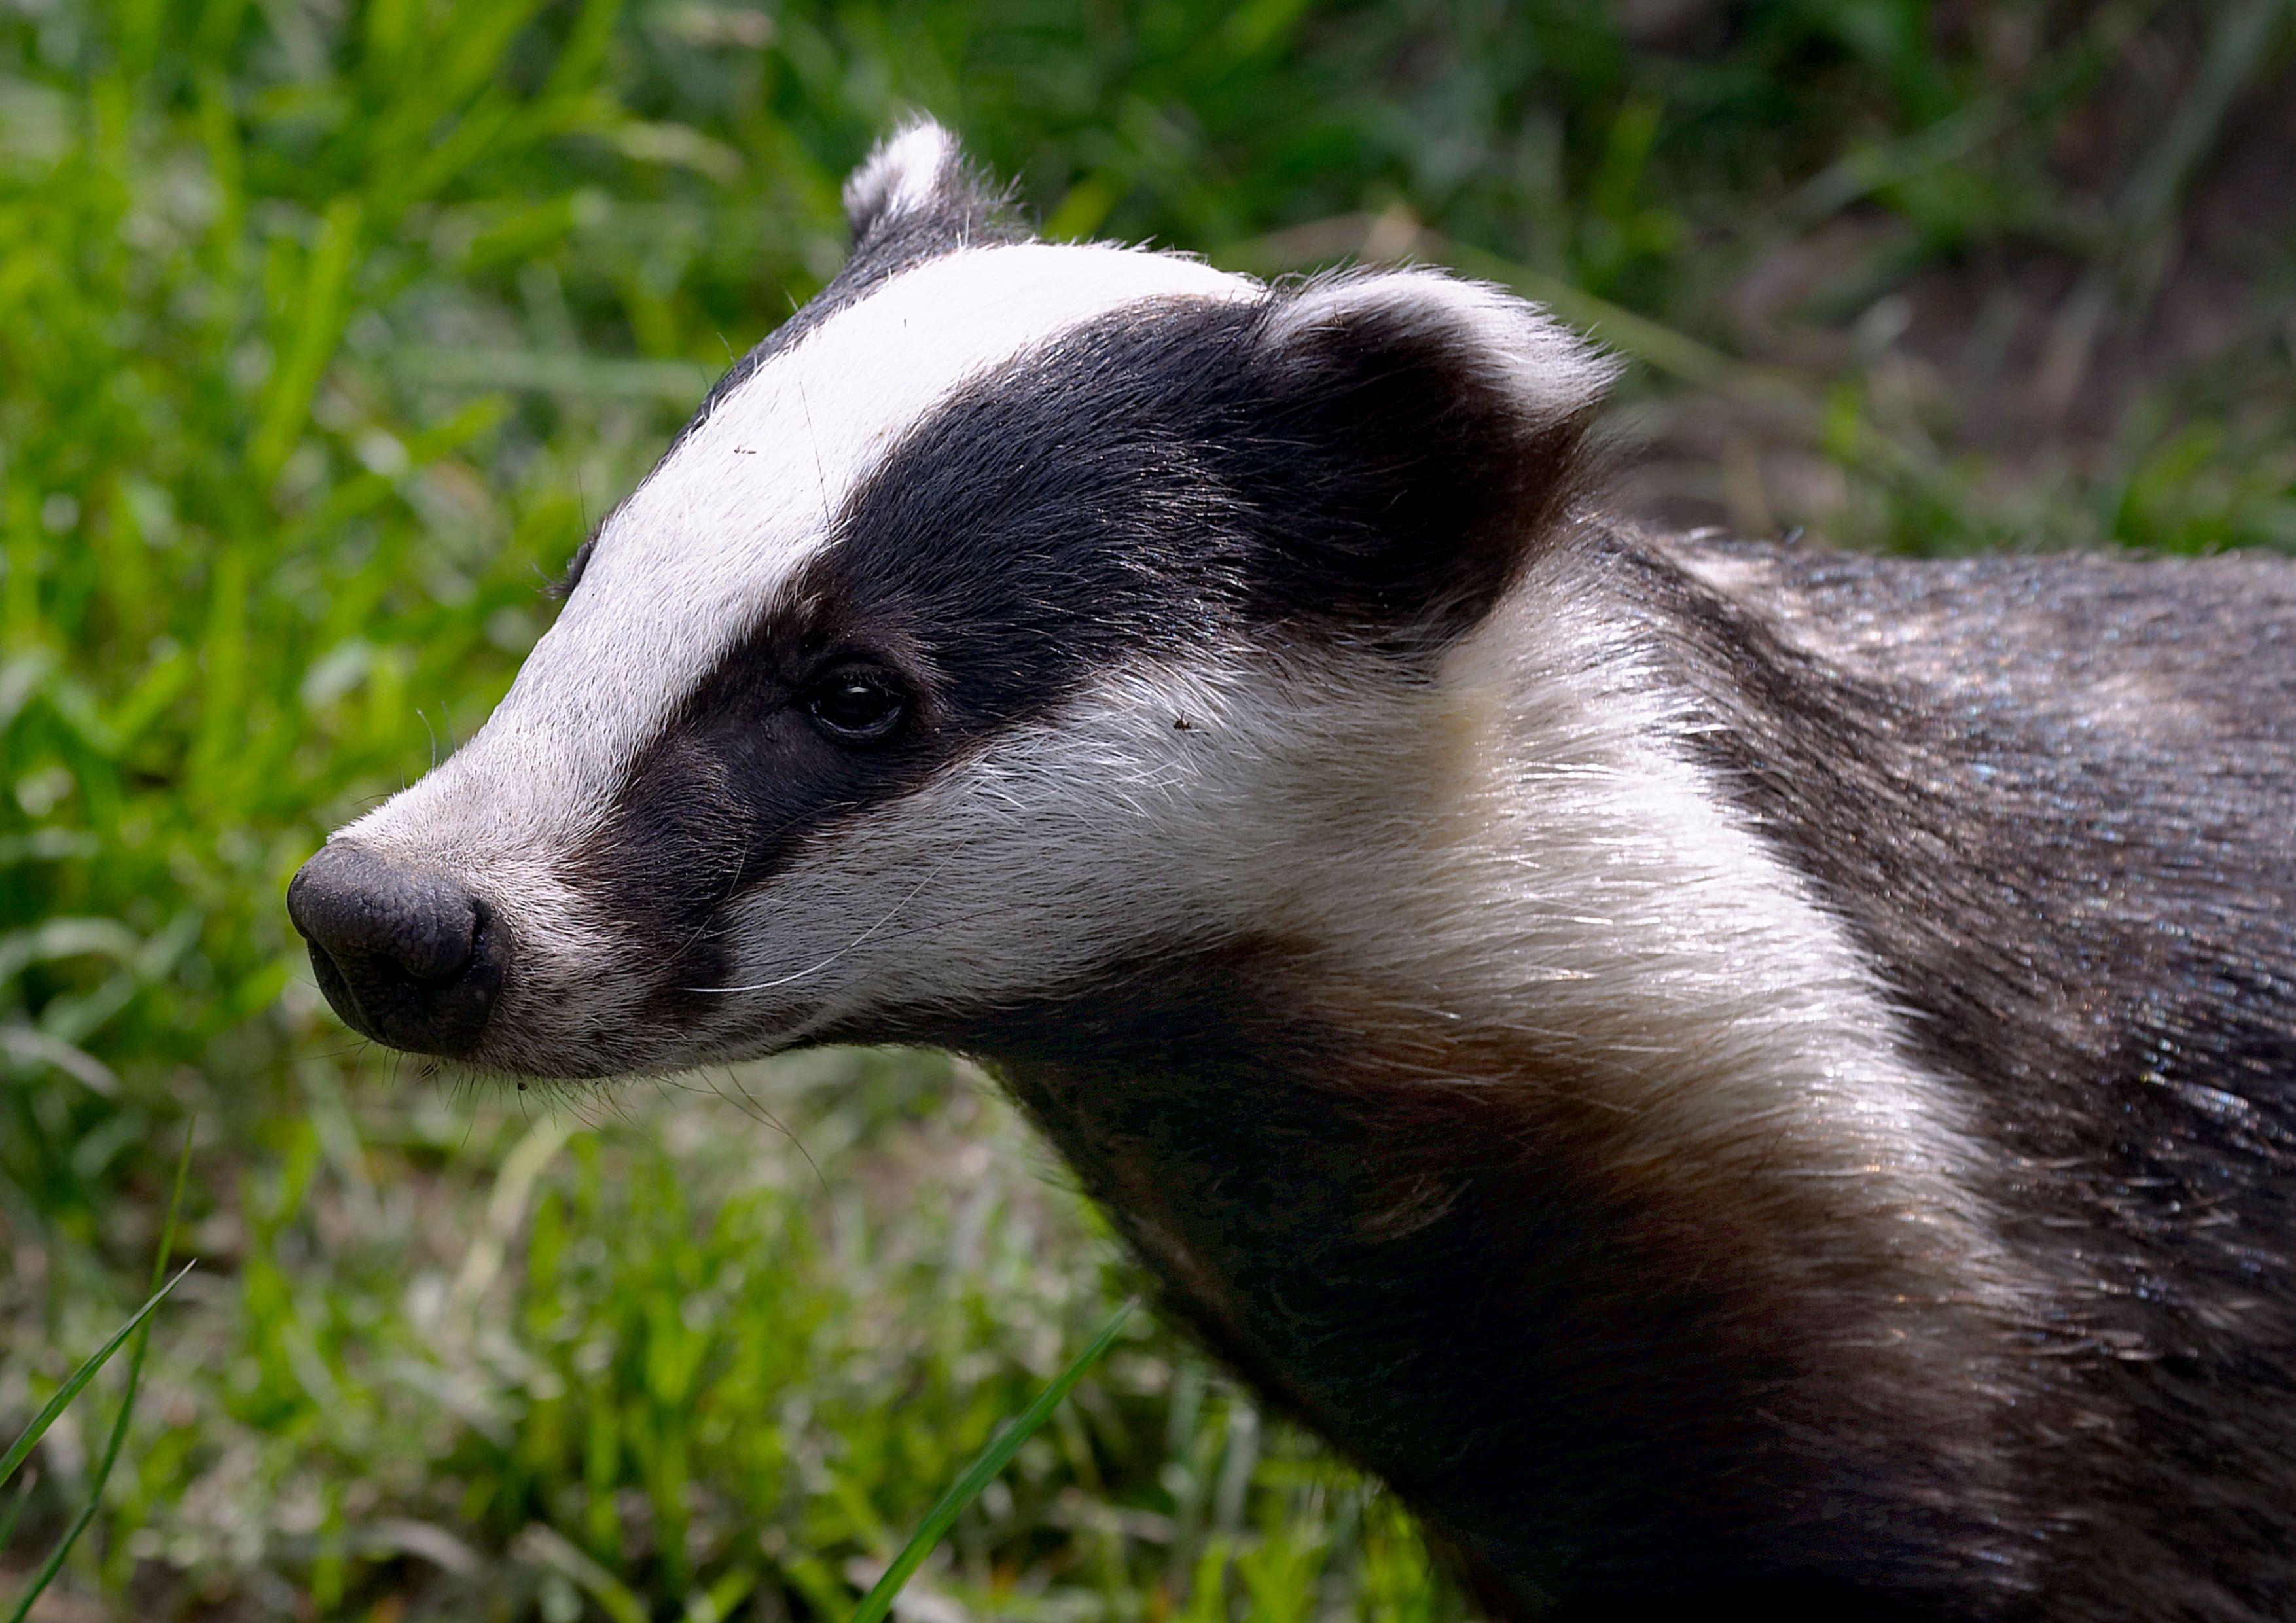 badgers, we don't need your stinking badgers. Badgers